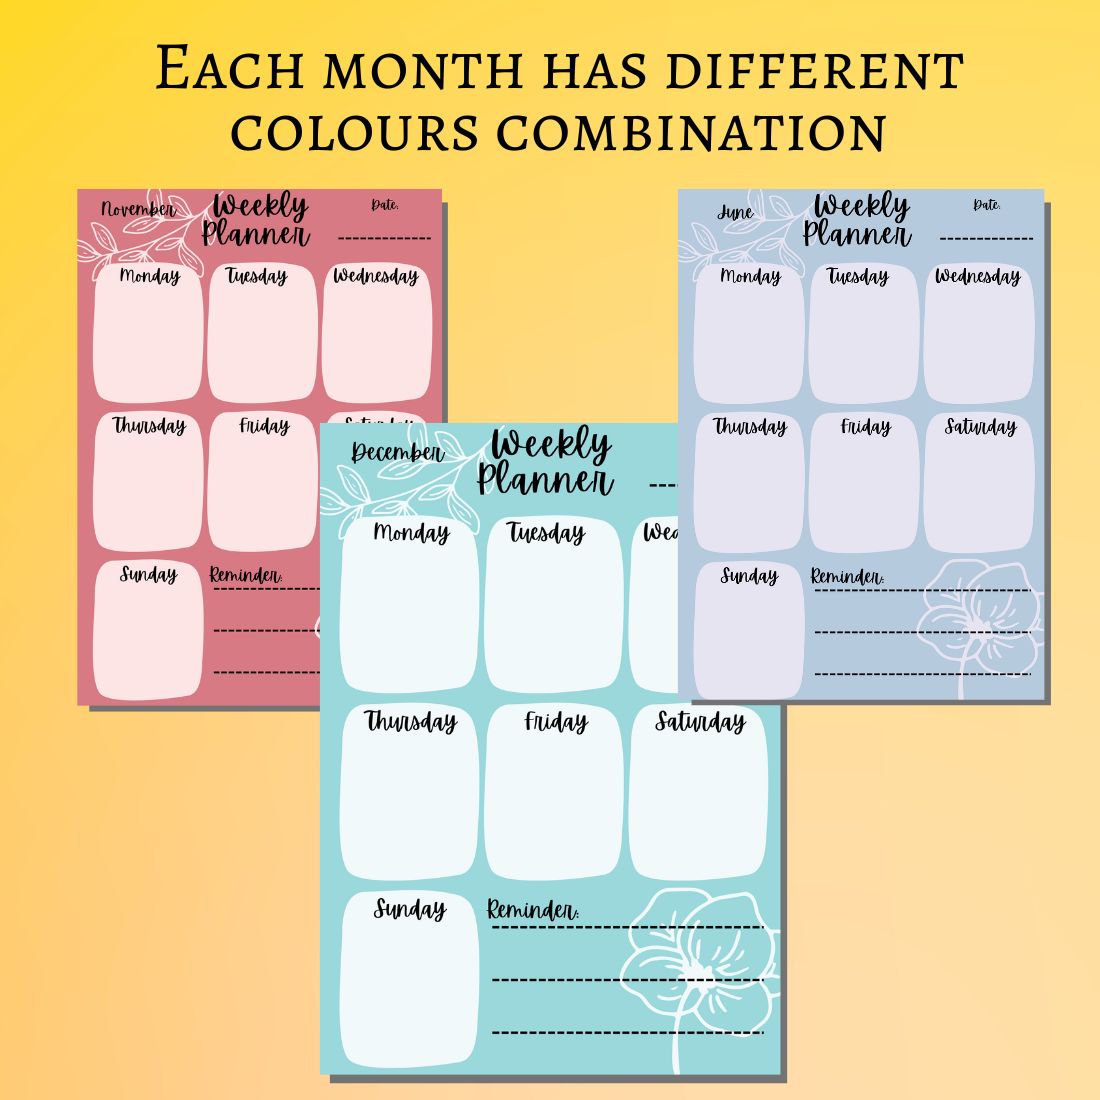 Prints of weekly planner for 1 year.